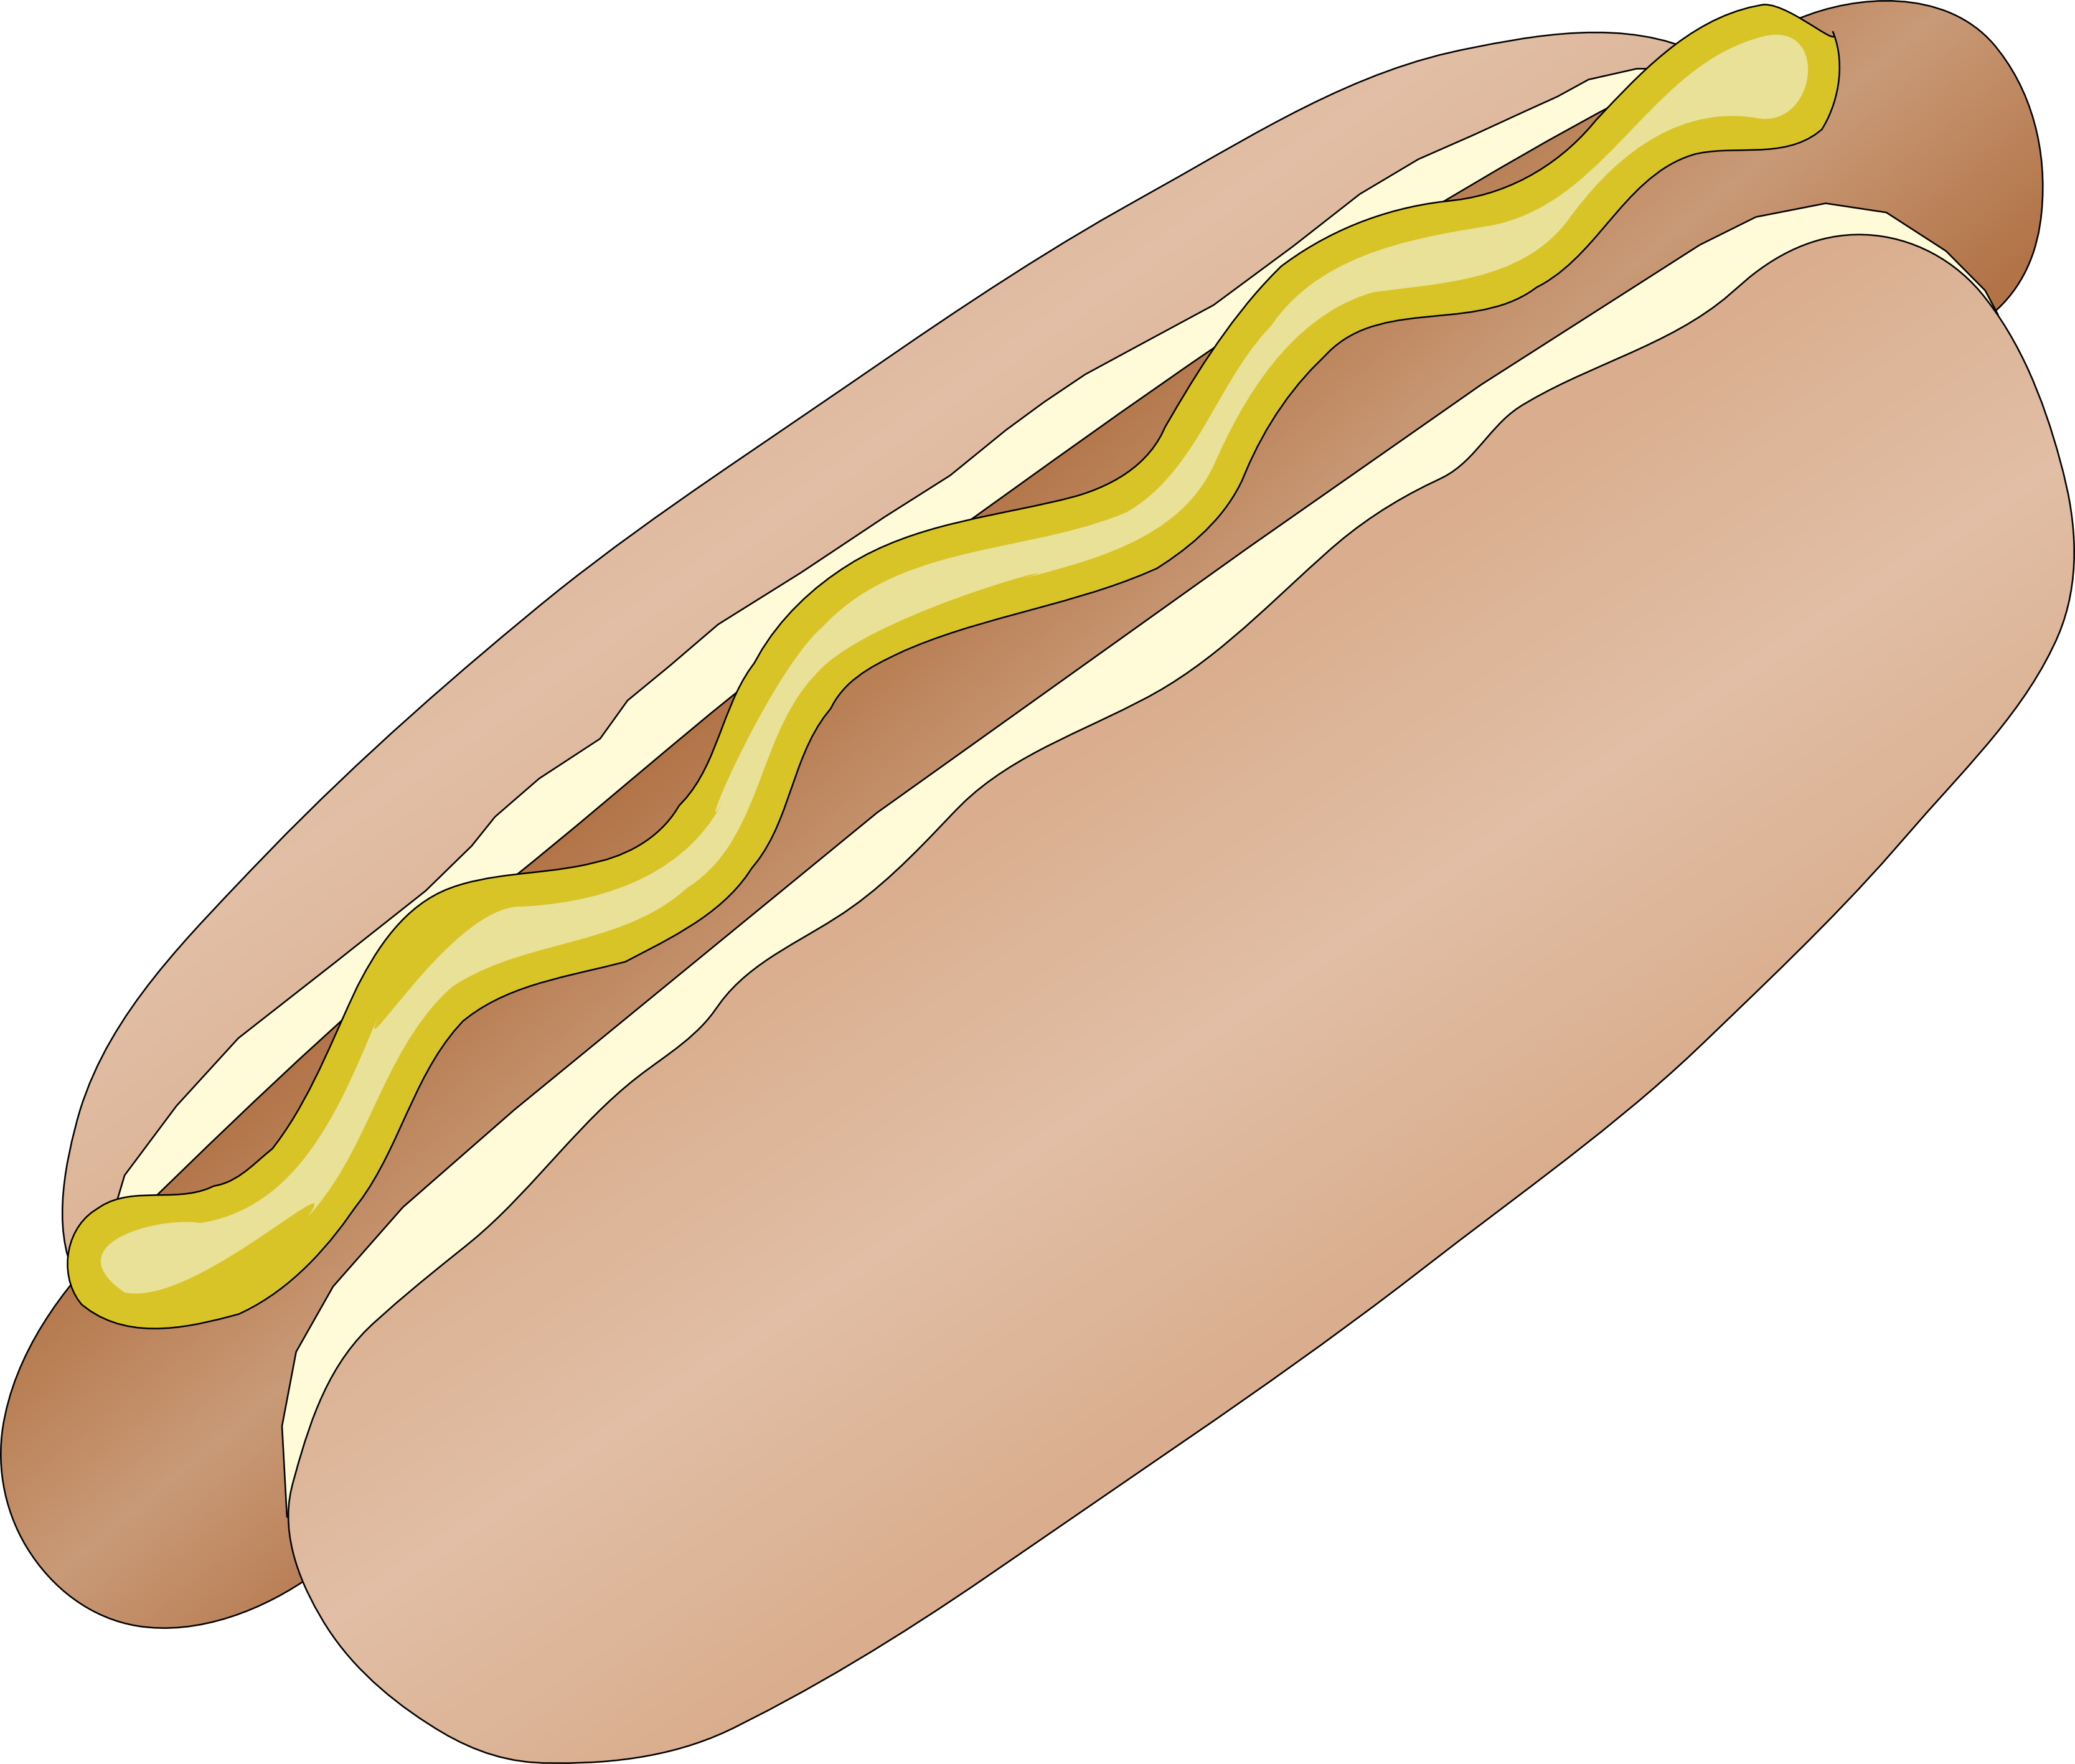 Clip Art: Hot Dog Scalable Vector Graphics SVG ...